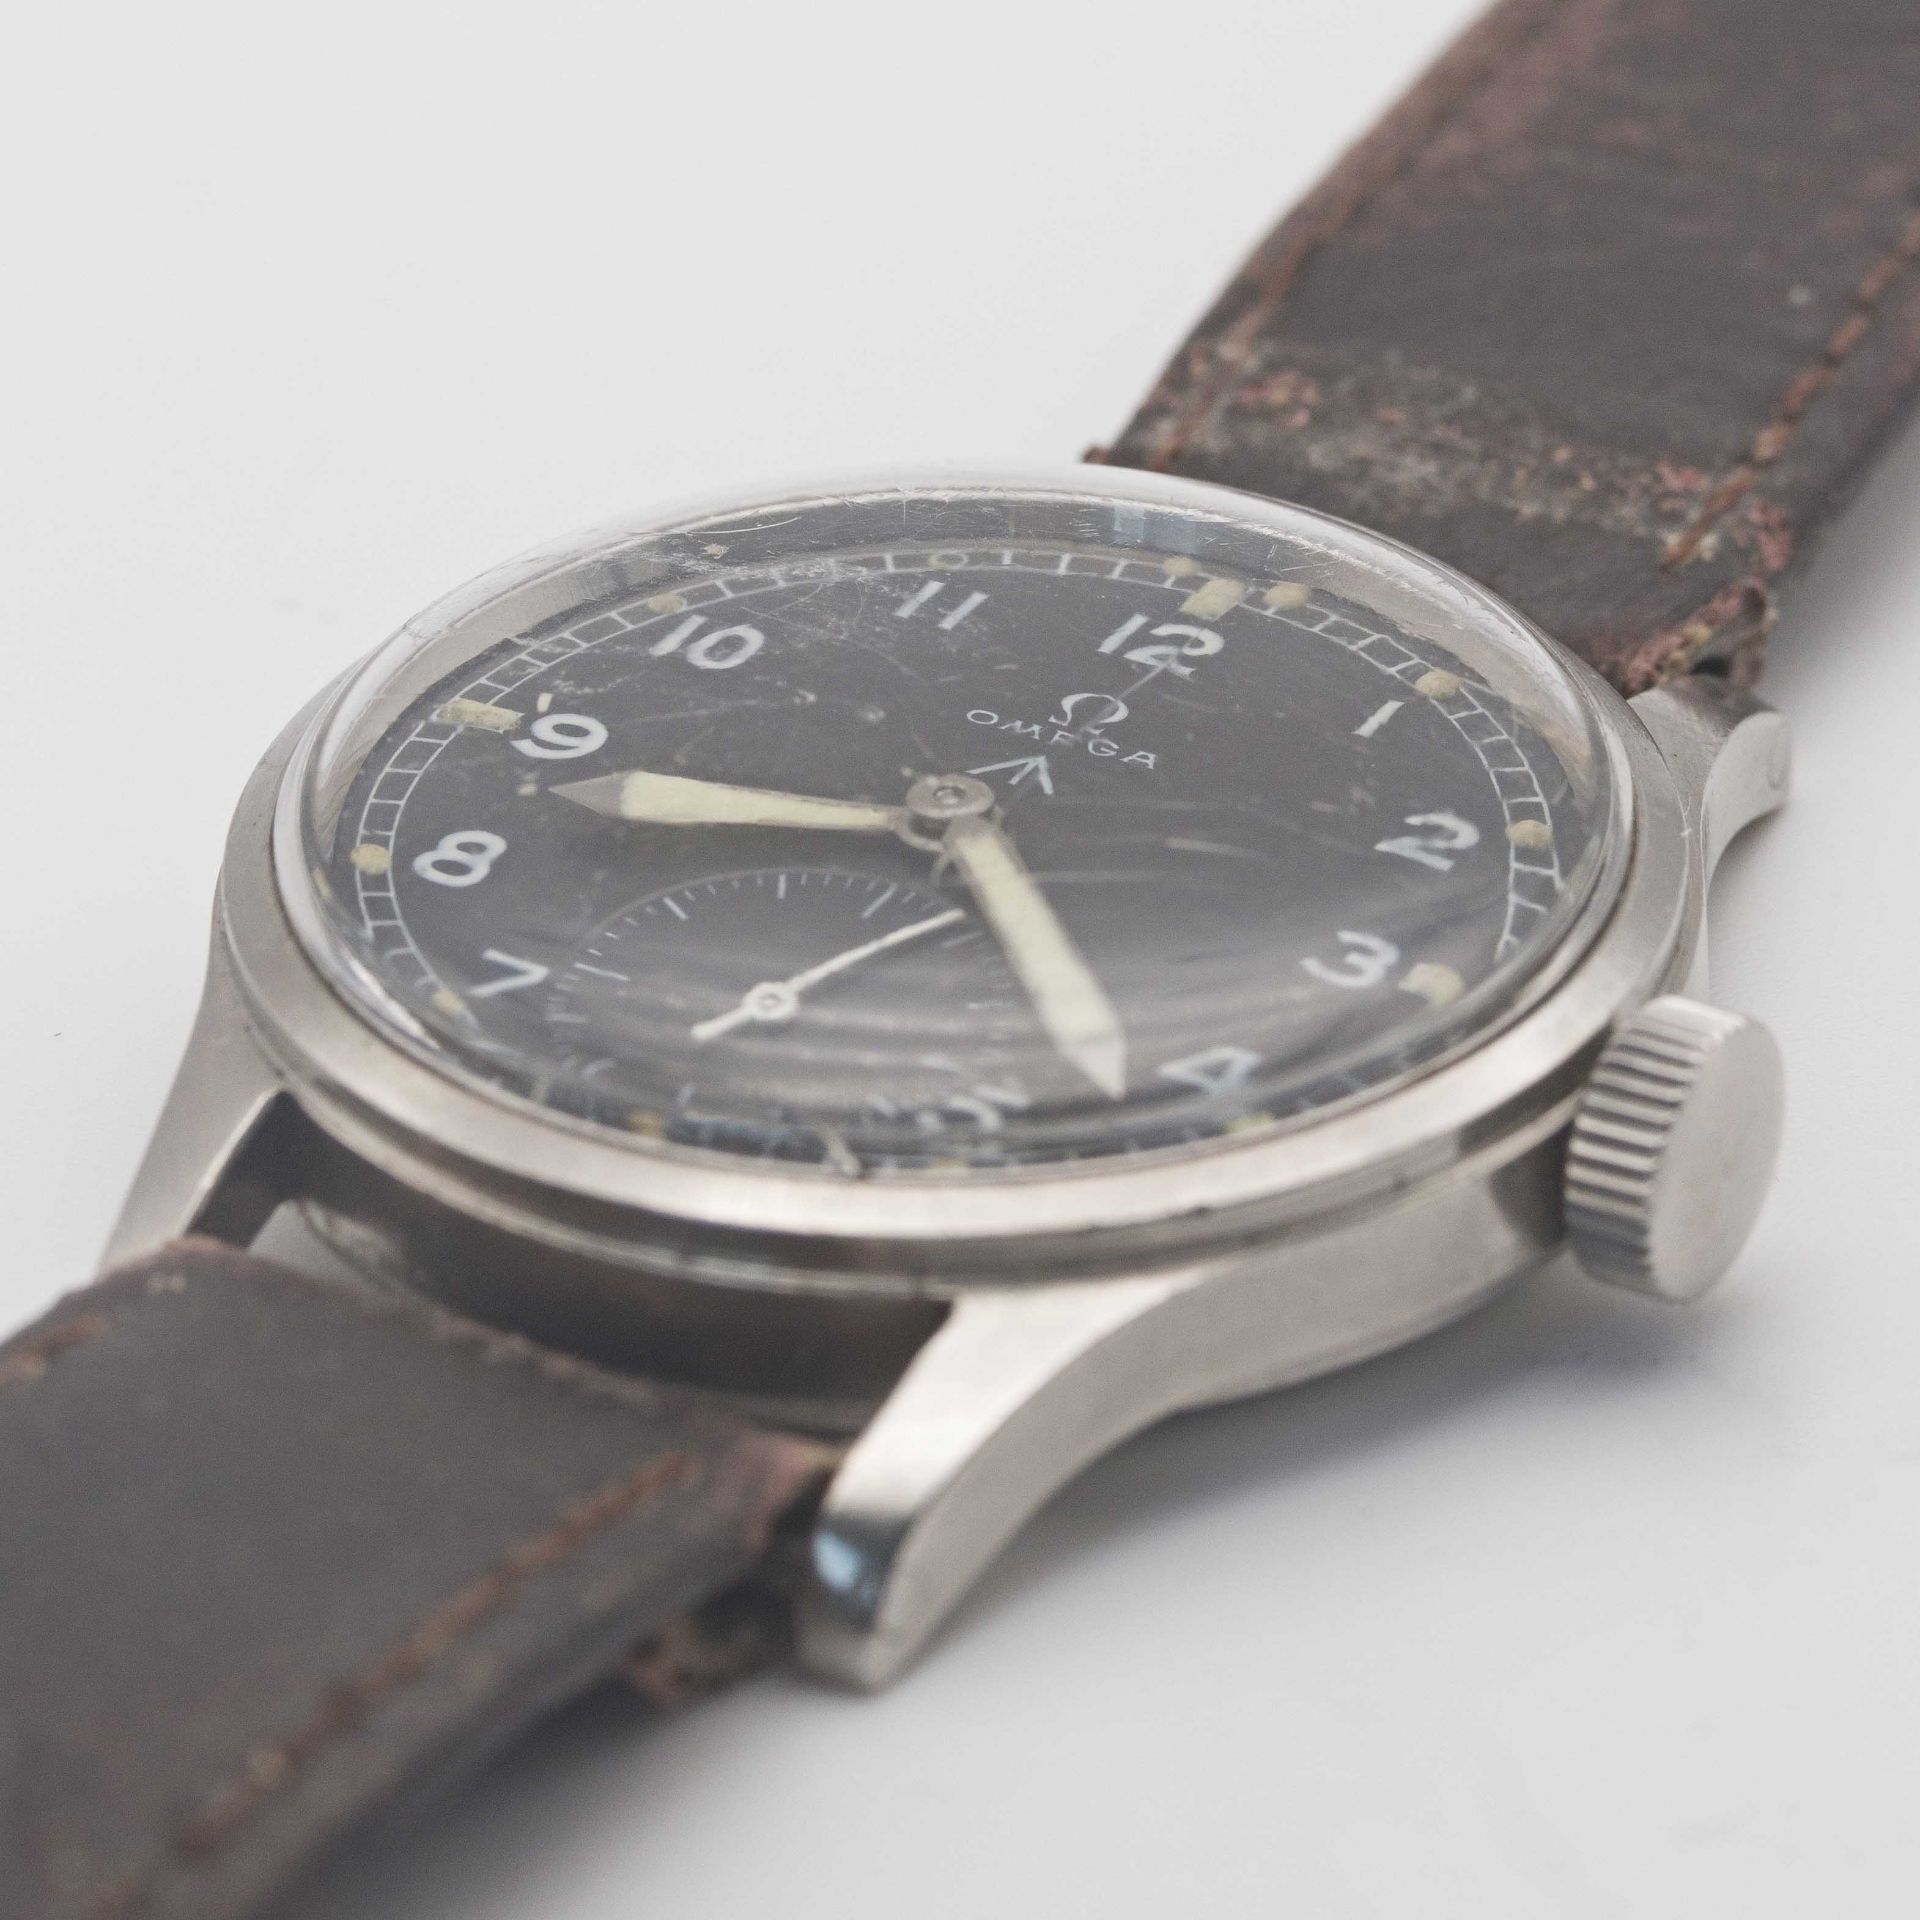 A GENTLEMAN'S STAINLESS STEEL BRITISH MILITARY OMEGA W.W.W. WRIST WATCH CIRCA 1945, PART OF THE " - Image 3 of 9